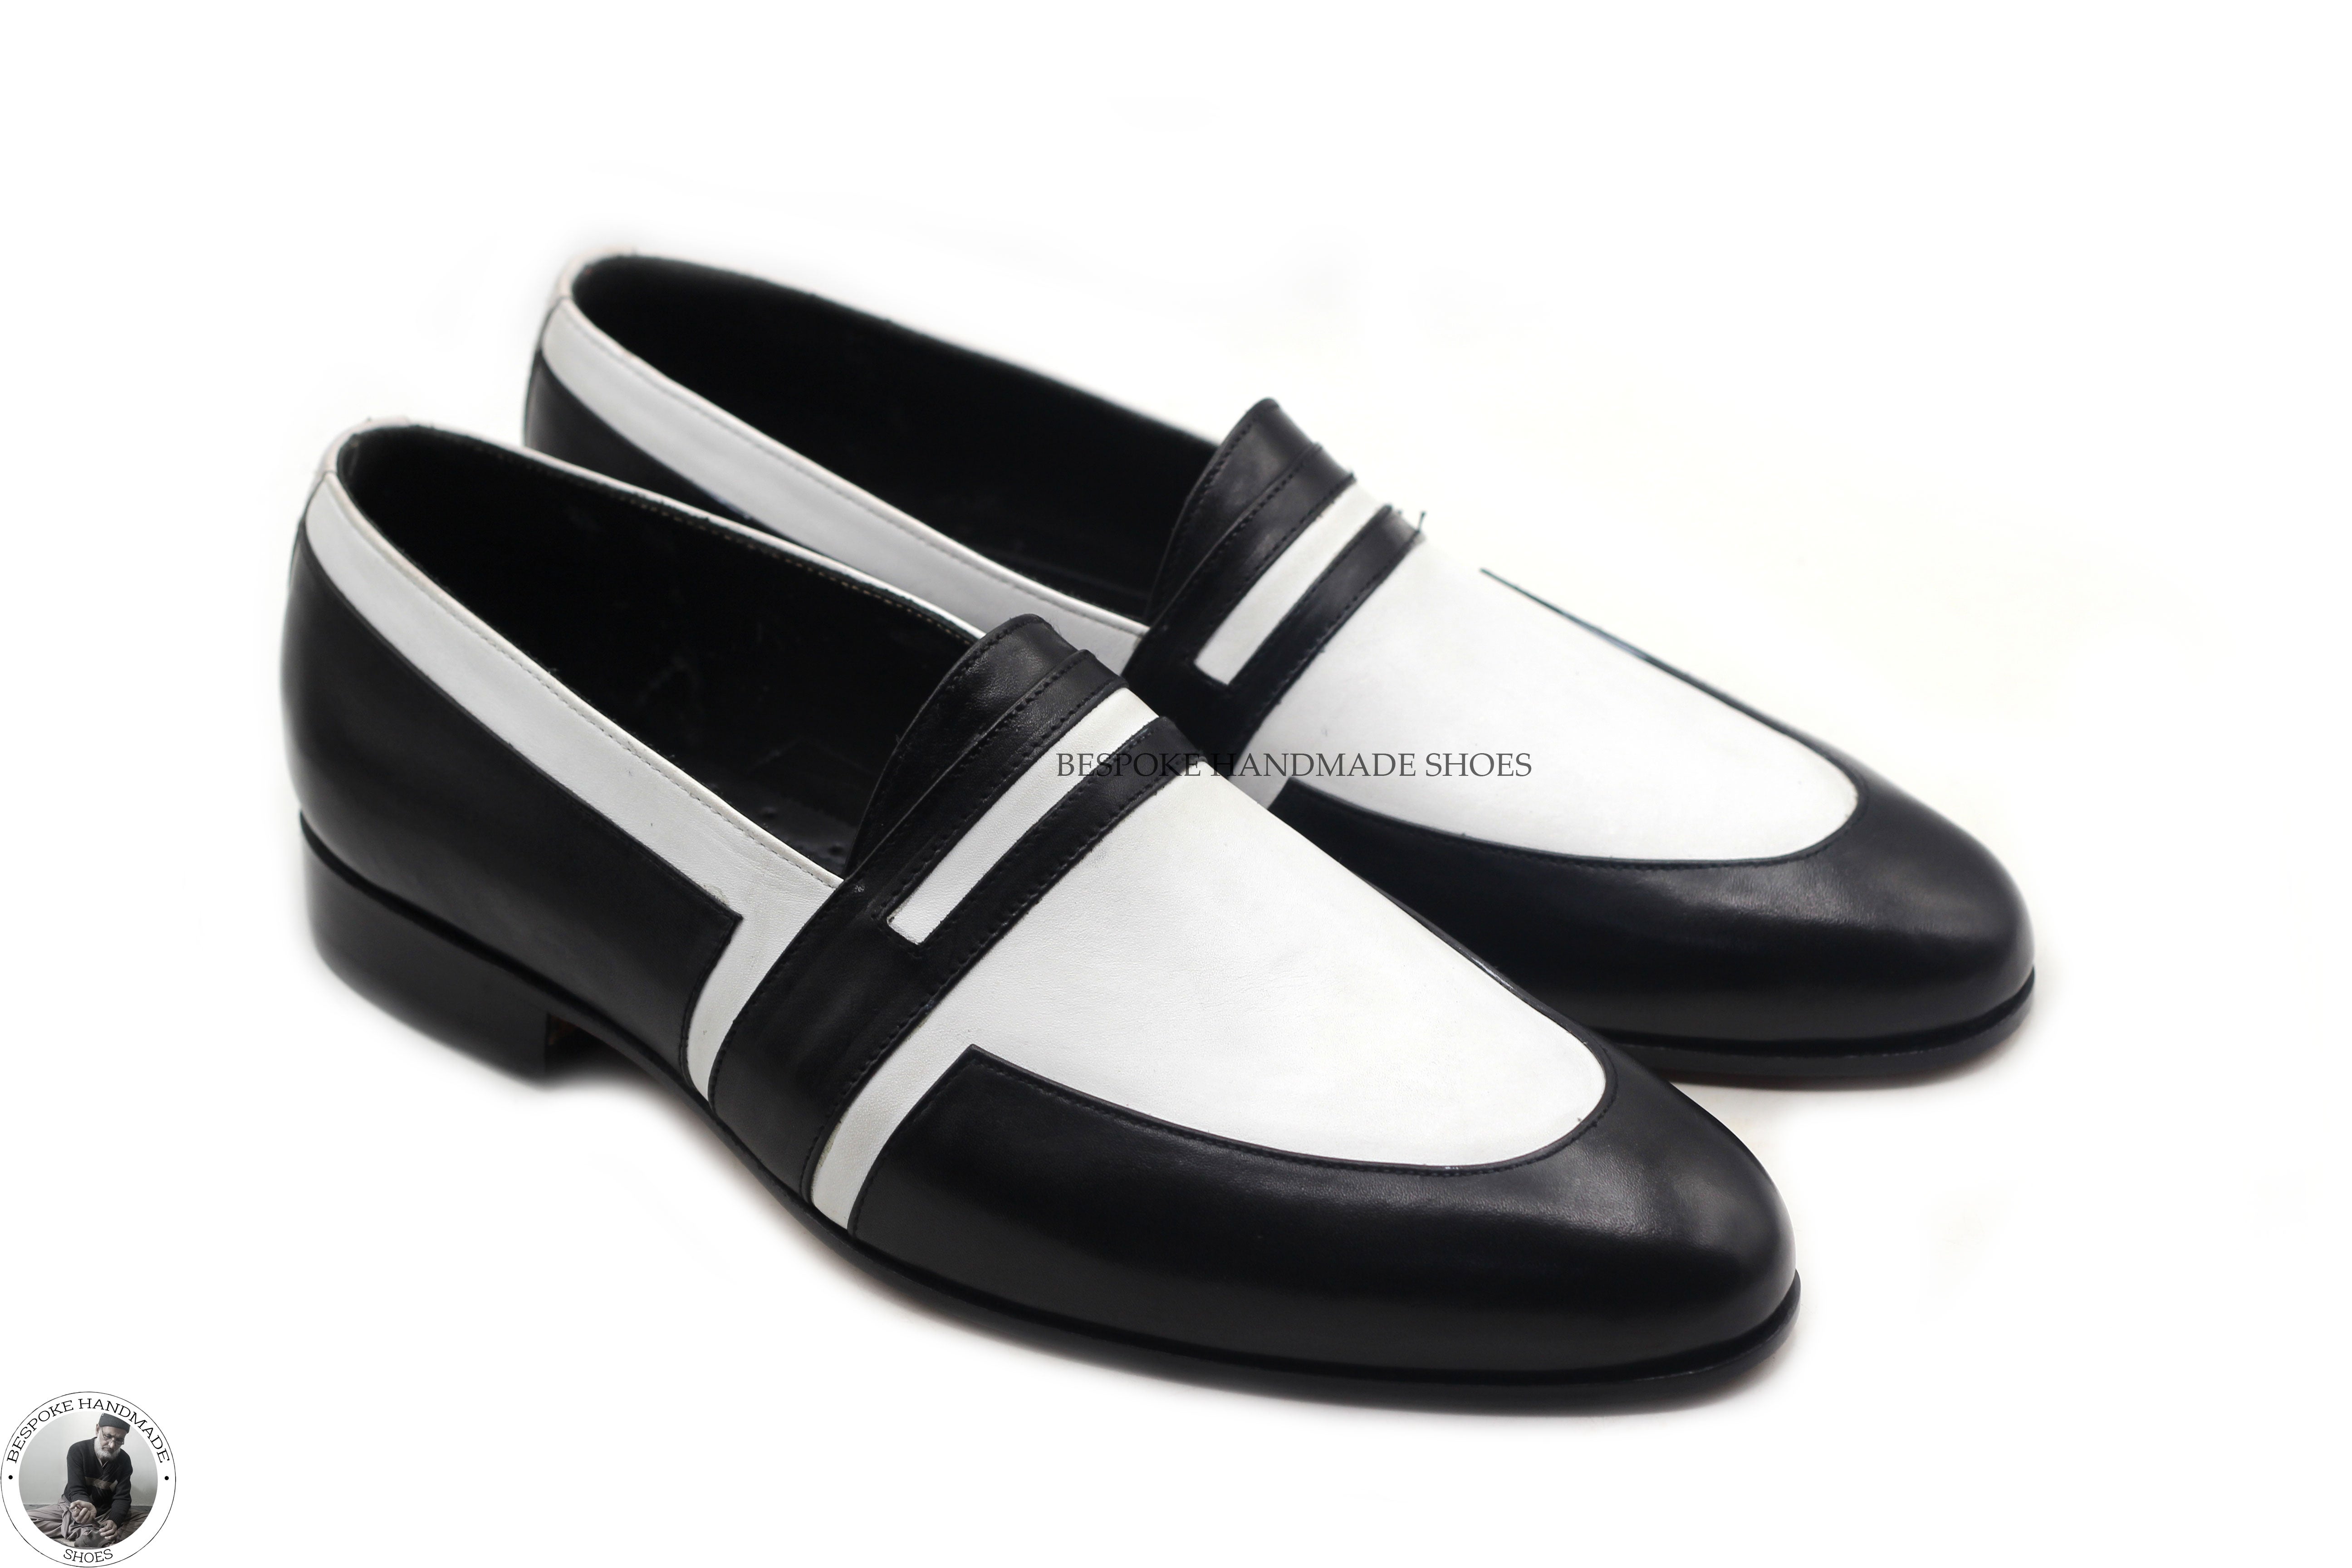 Handmade Men's White And Black Leather Slip On Moccasin Fashion Shoes For Men's